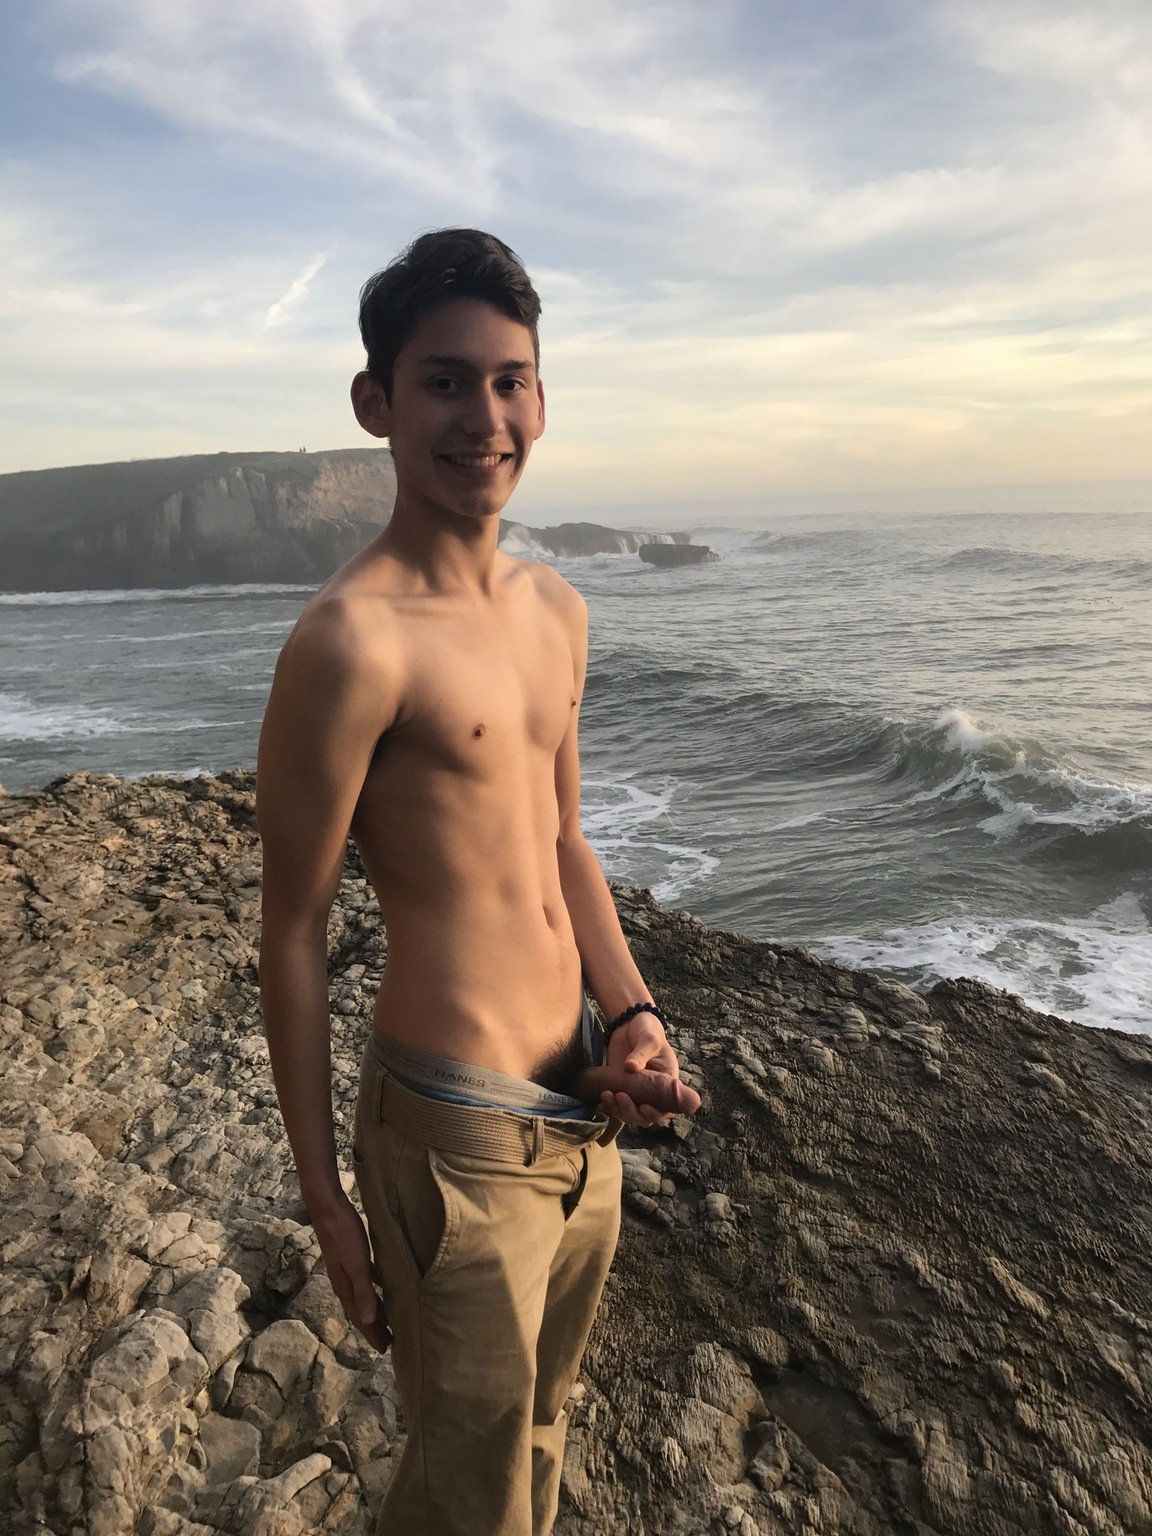 [18yo] BF at the beach - anyone interested in joining us next time?